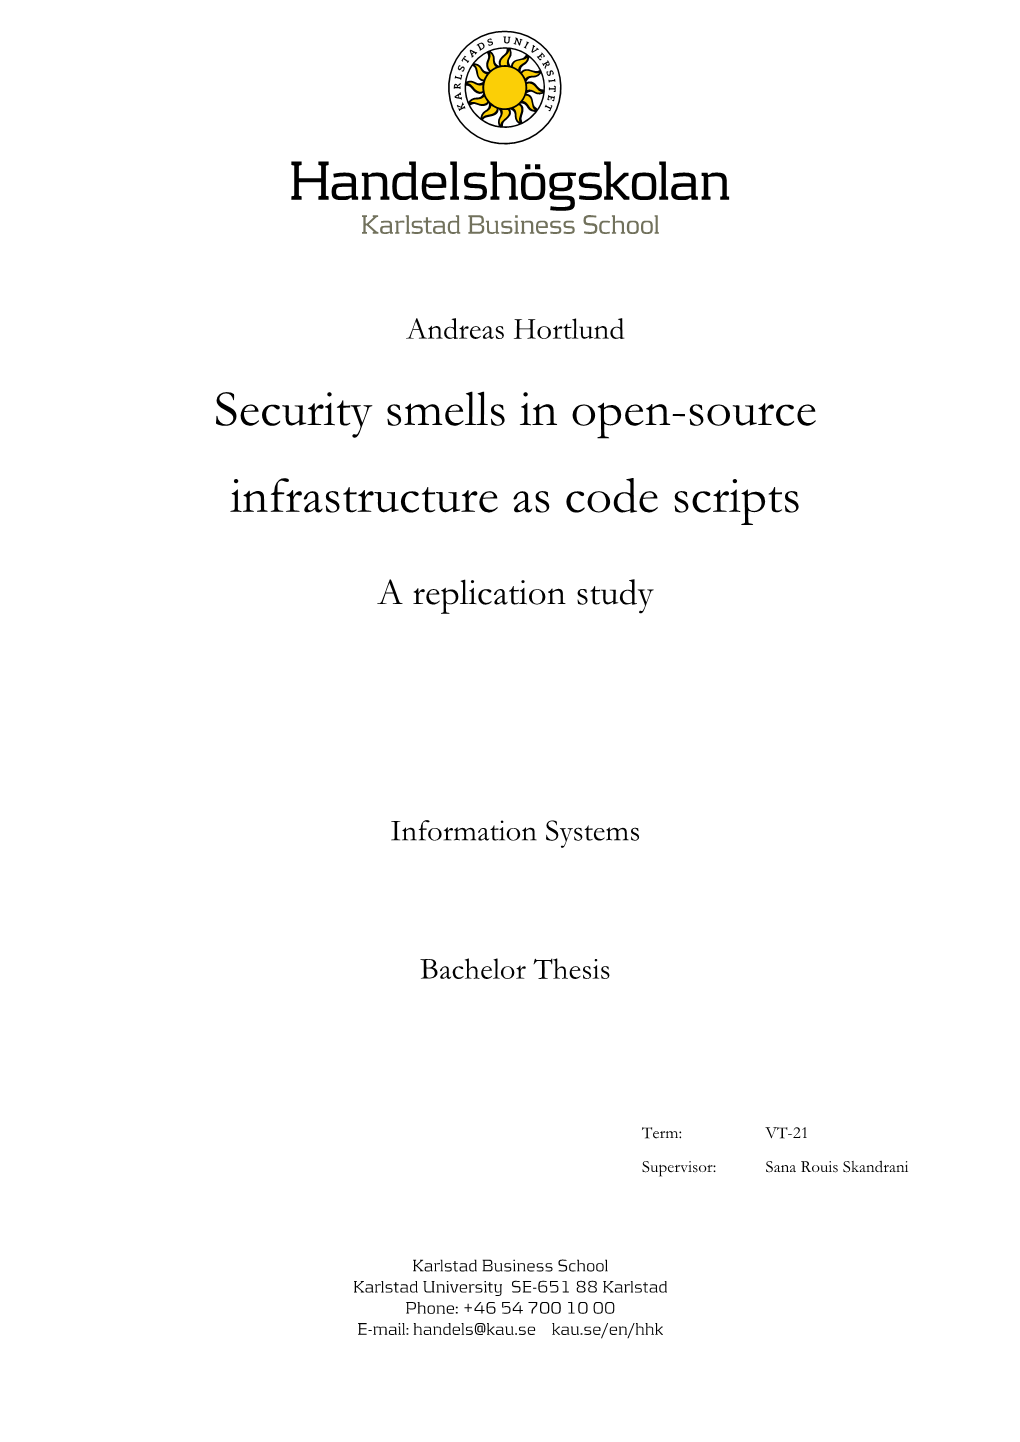 Security Smells in Open-Source Infrastructure As Code Scripts